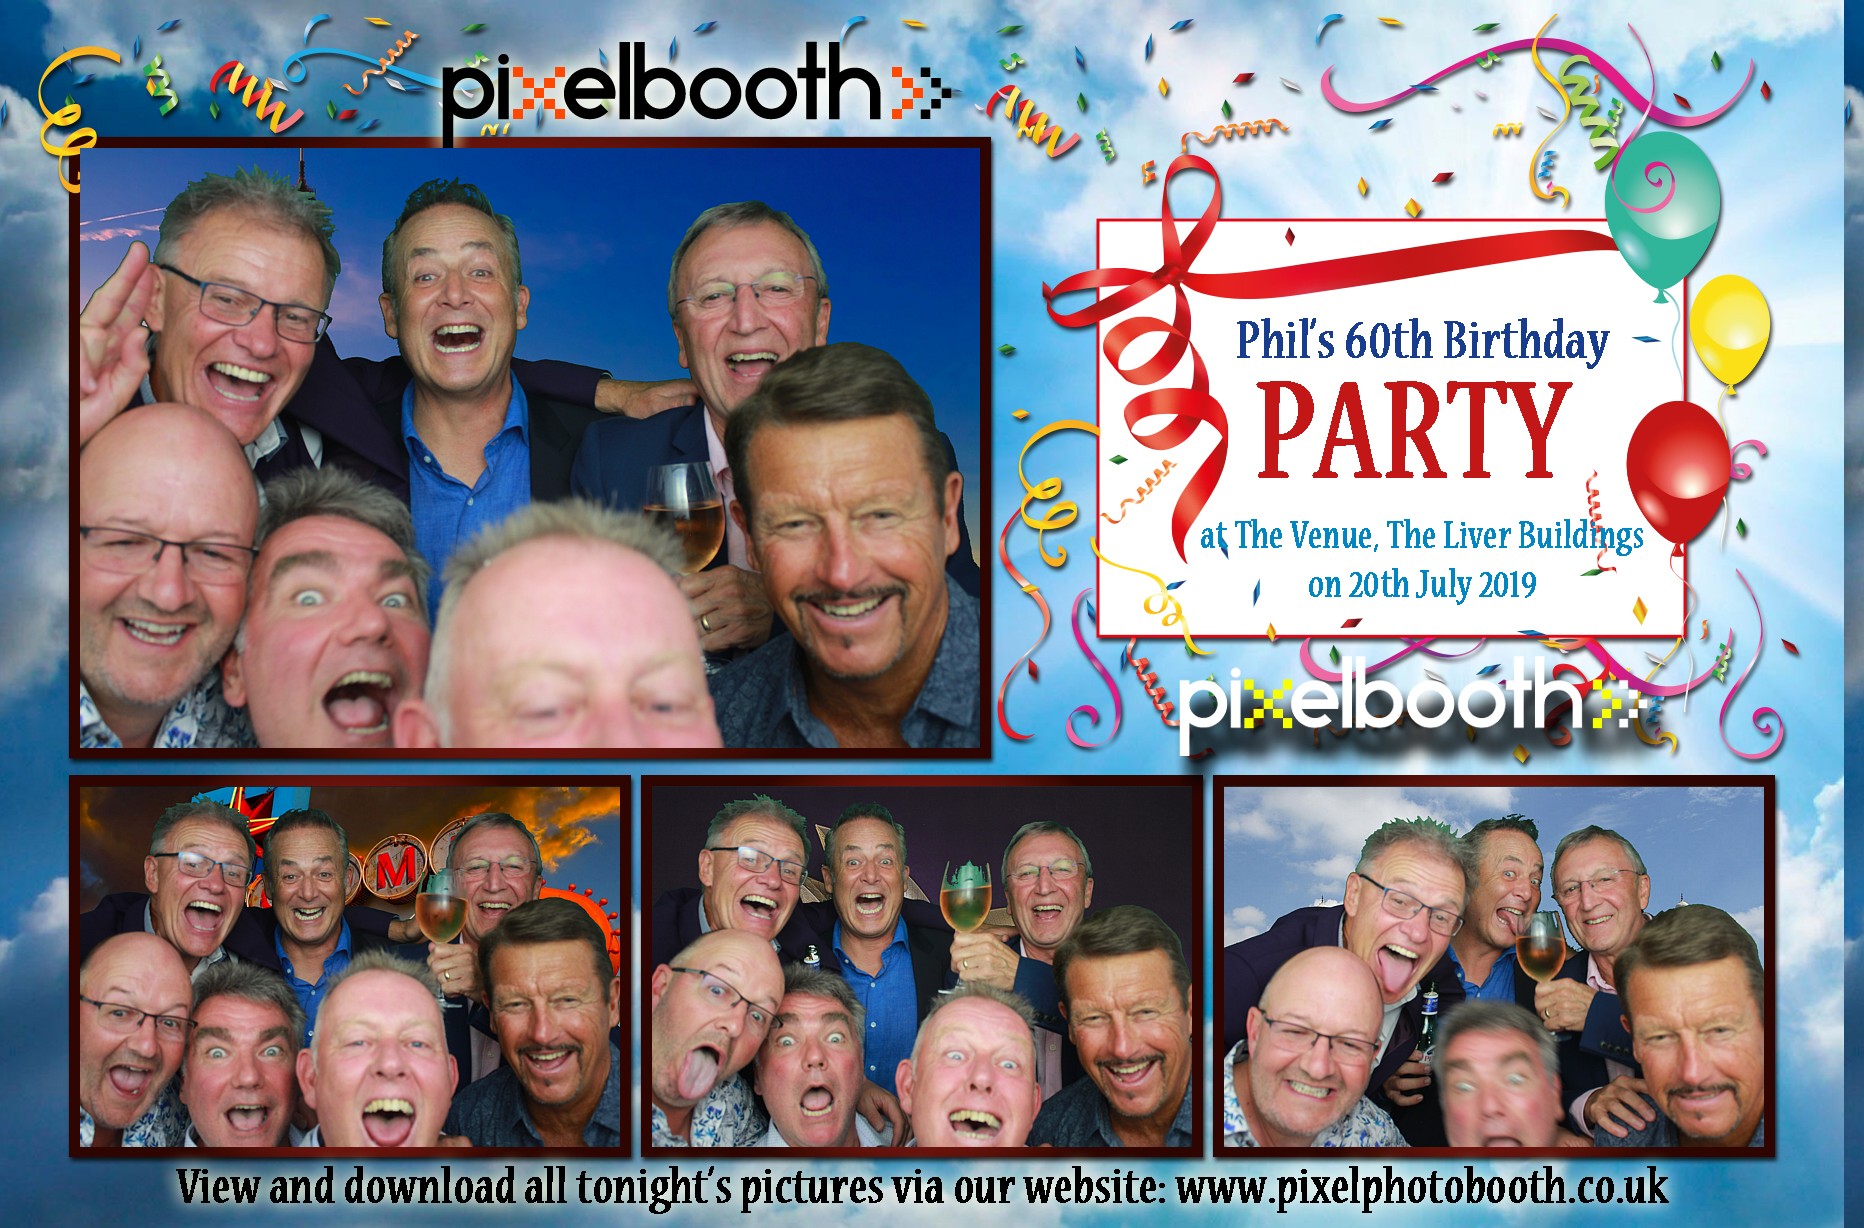 20th July 2019: Phil's 60th Birthday Party